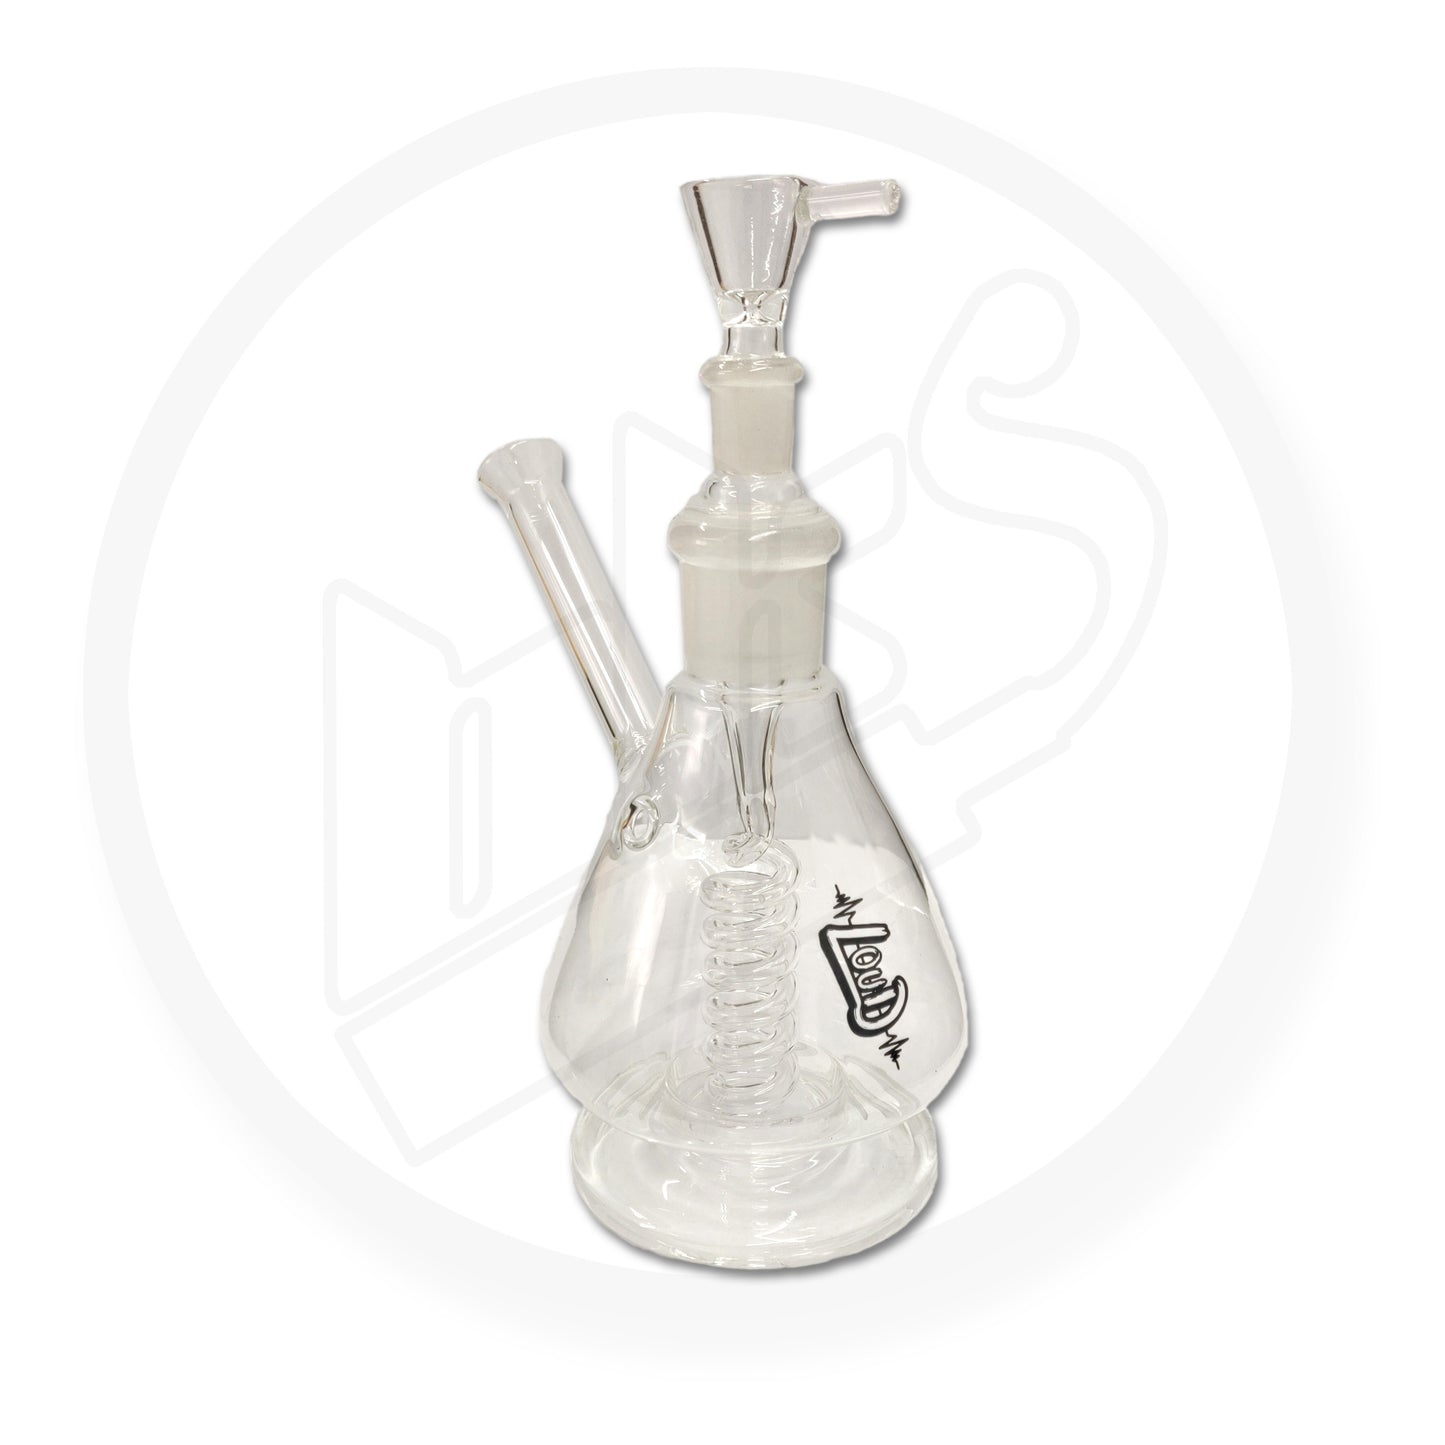 LOUD - Glass Waterpipe, 22cm, Flask Design with Spiral Downtube